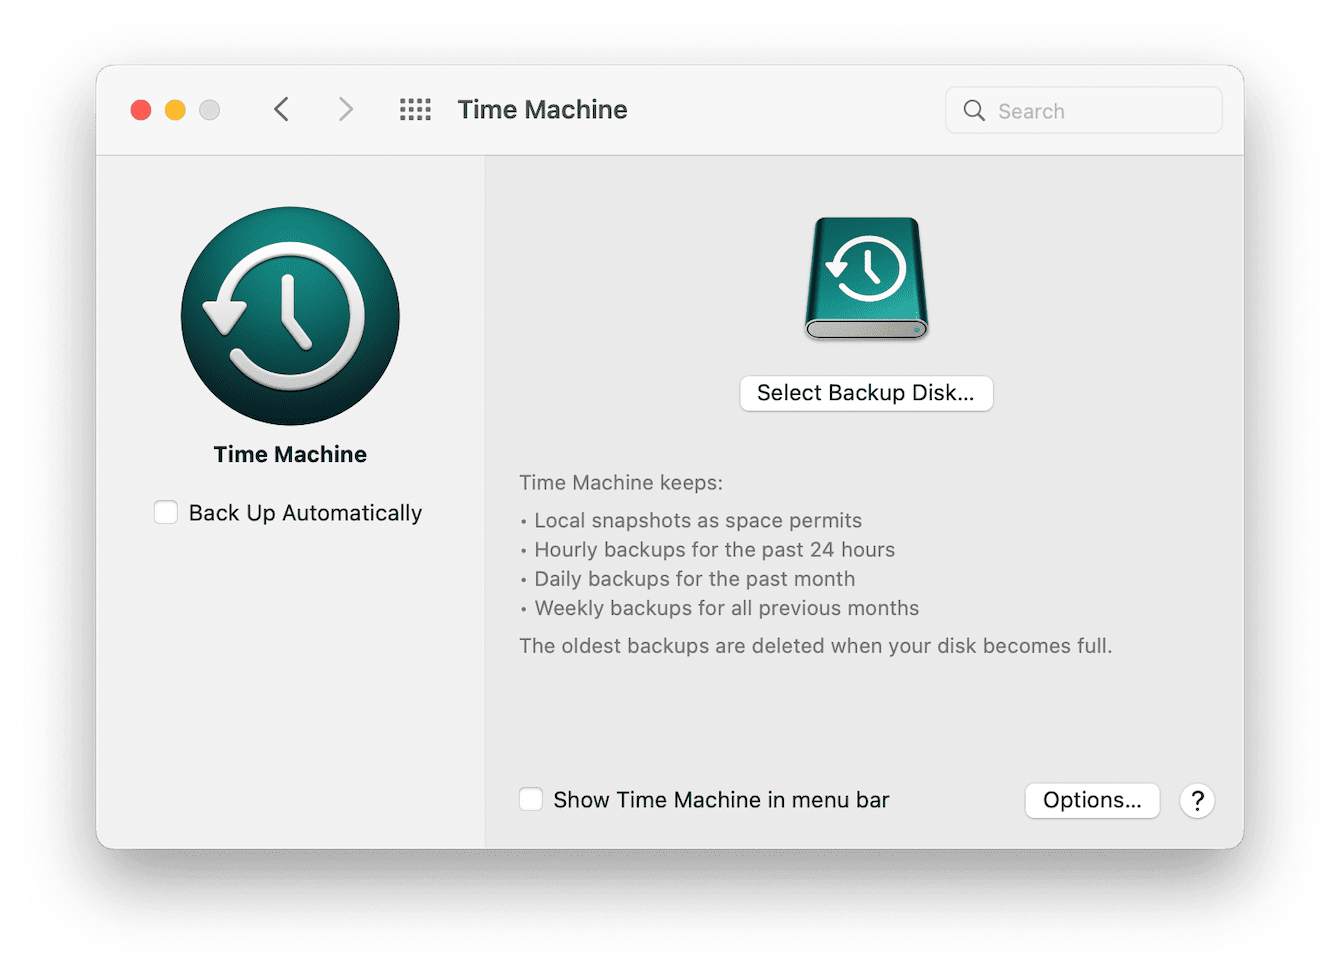 Time Machine from the main Apple menu